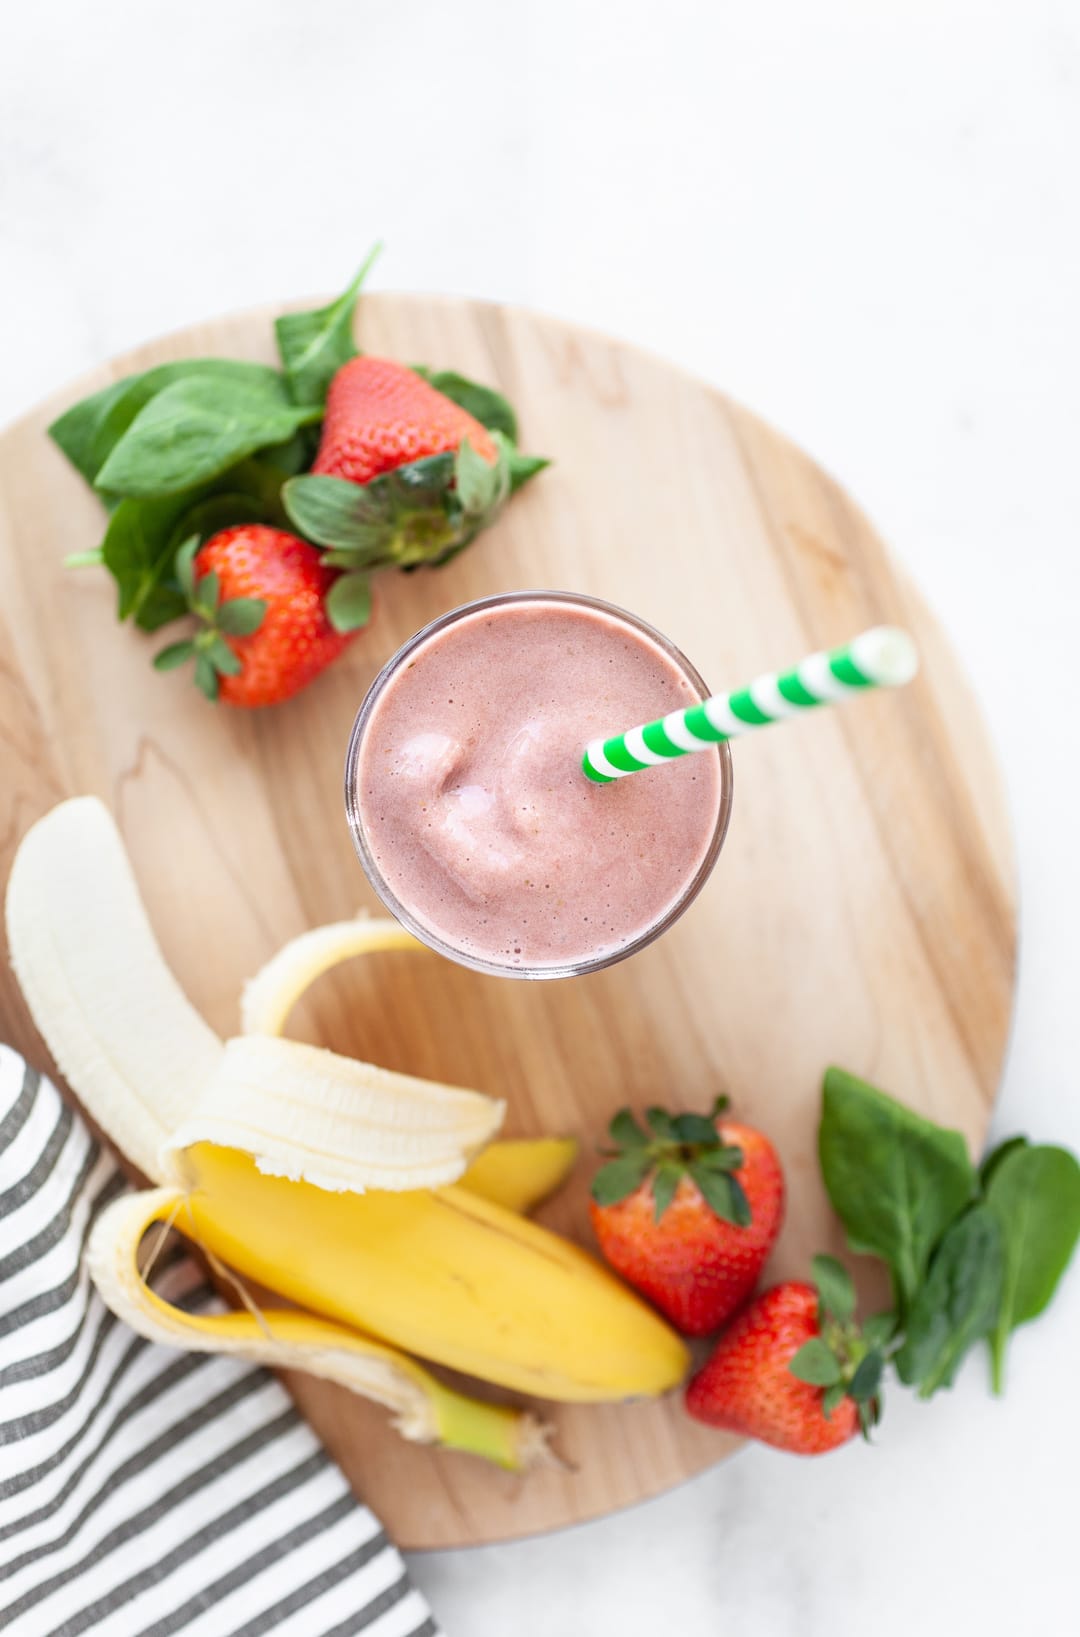 Easy Strawberry Banana Spinach Smoothie